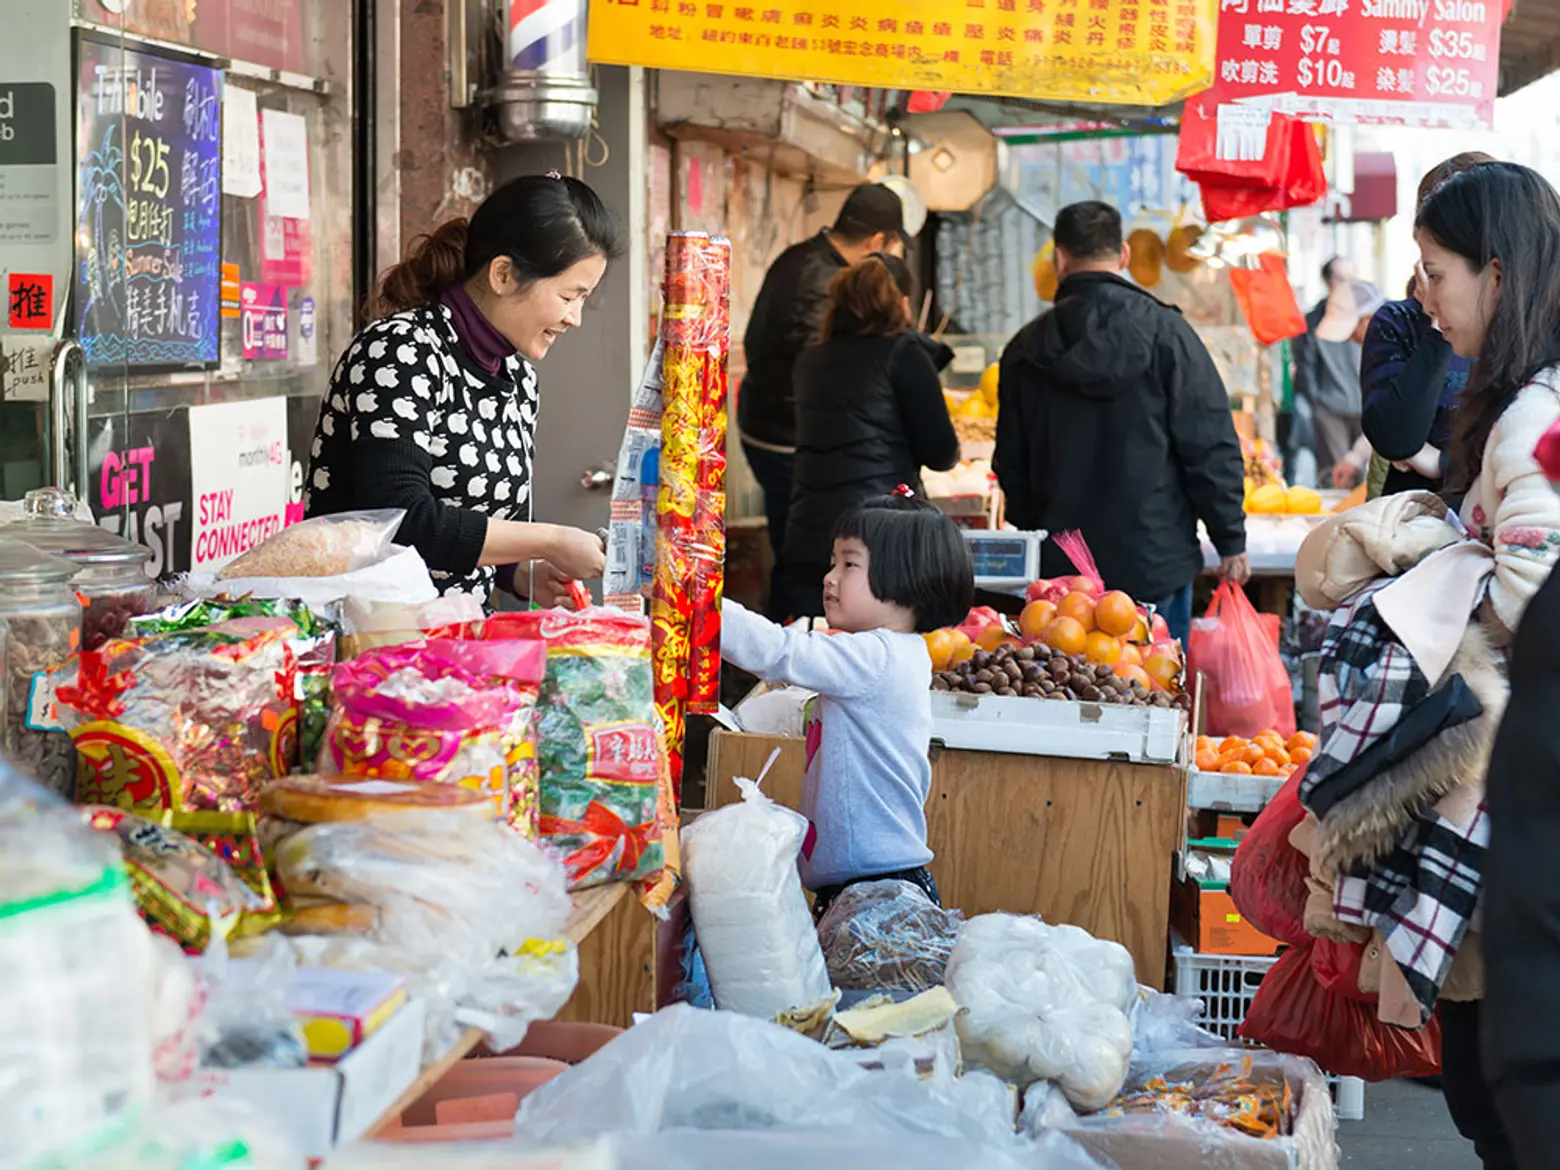 The Real Reason Chinatown Produce Is So Cheap; NYC Getting $39 Domestic Flights